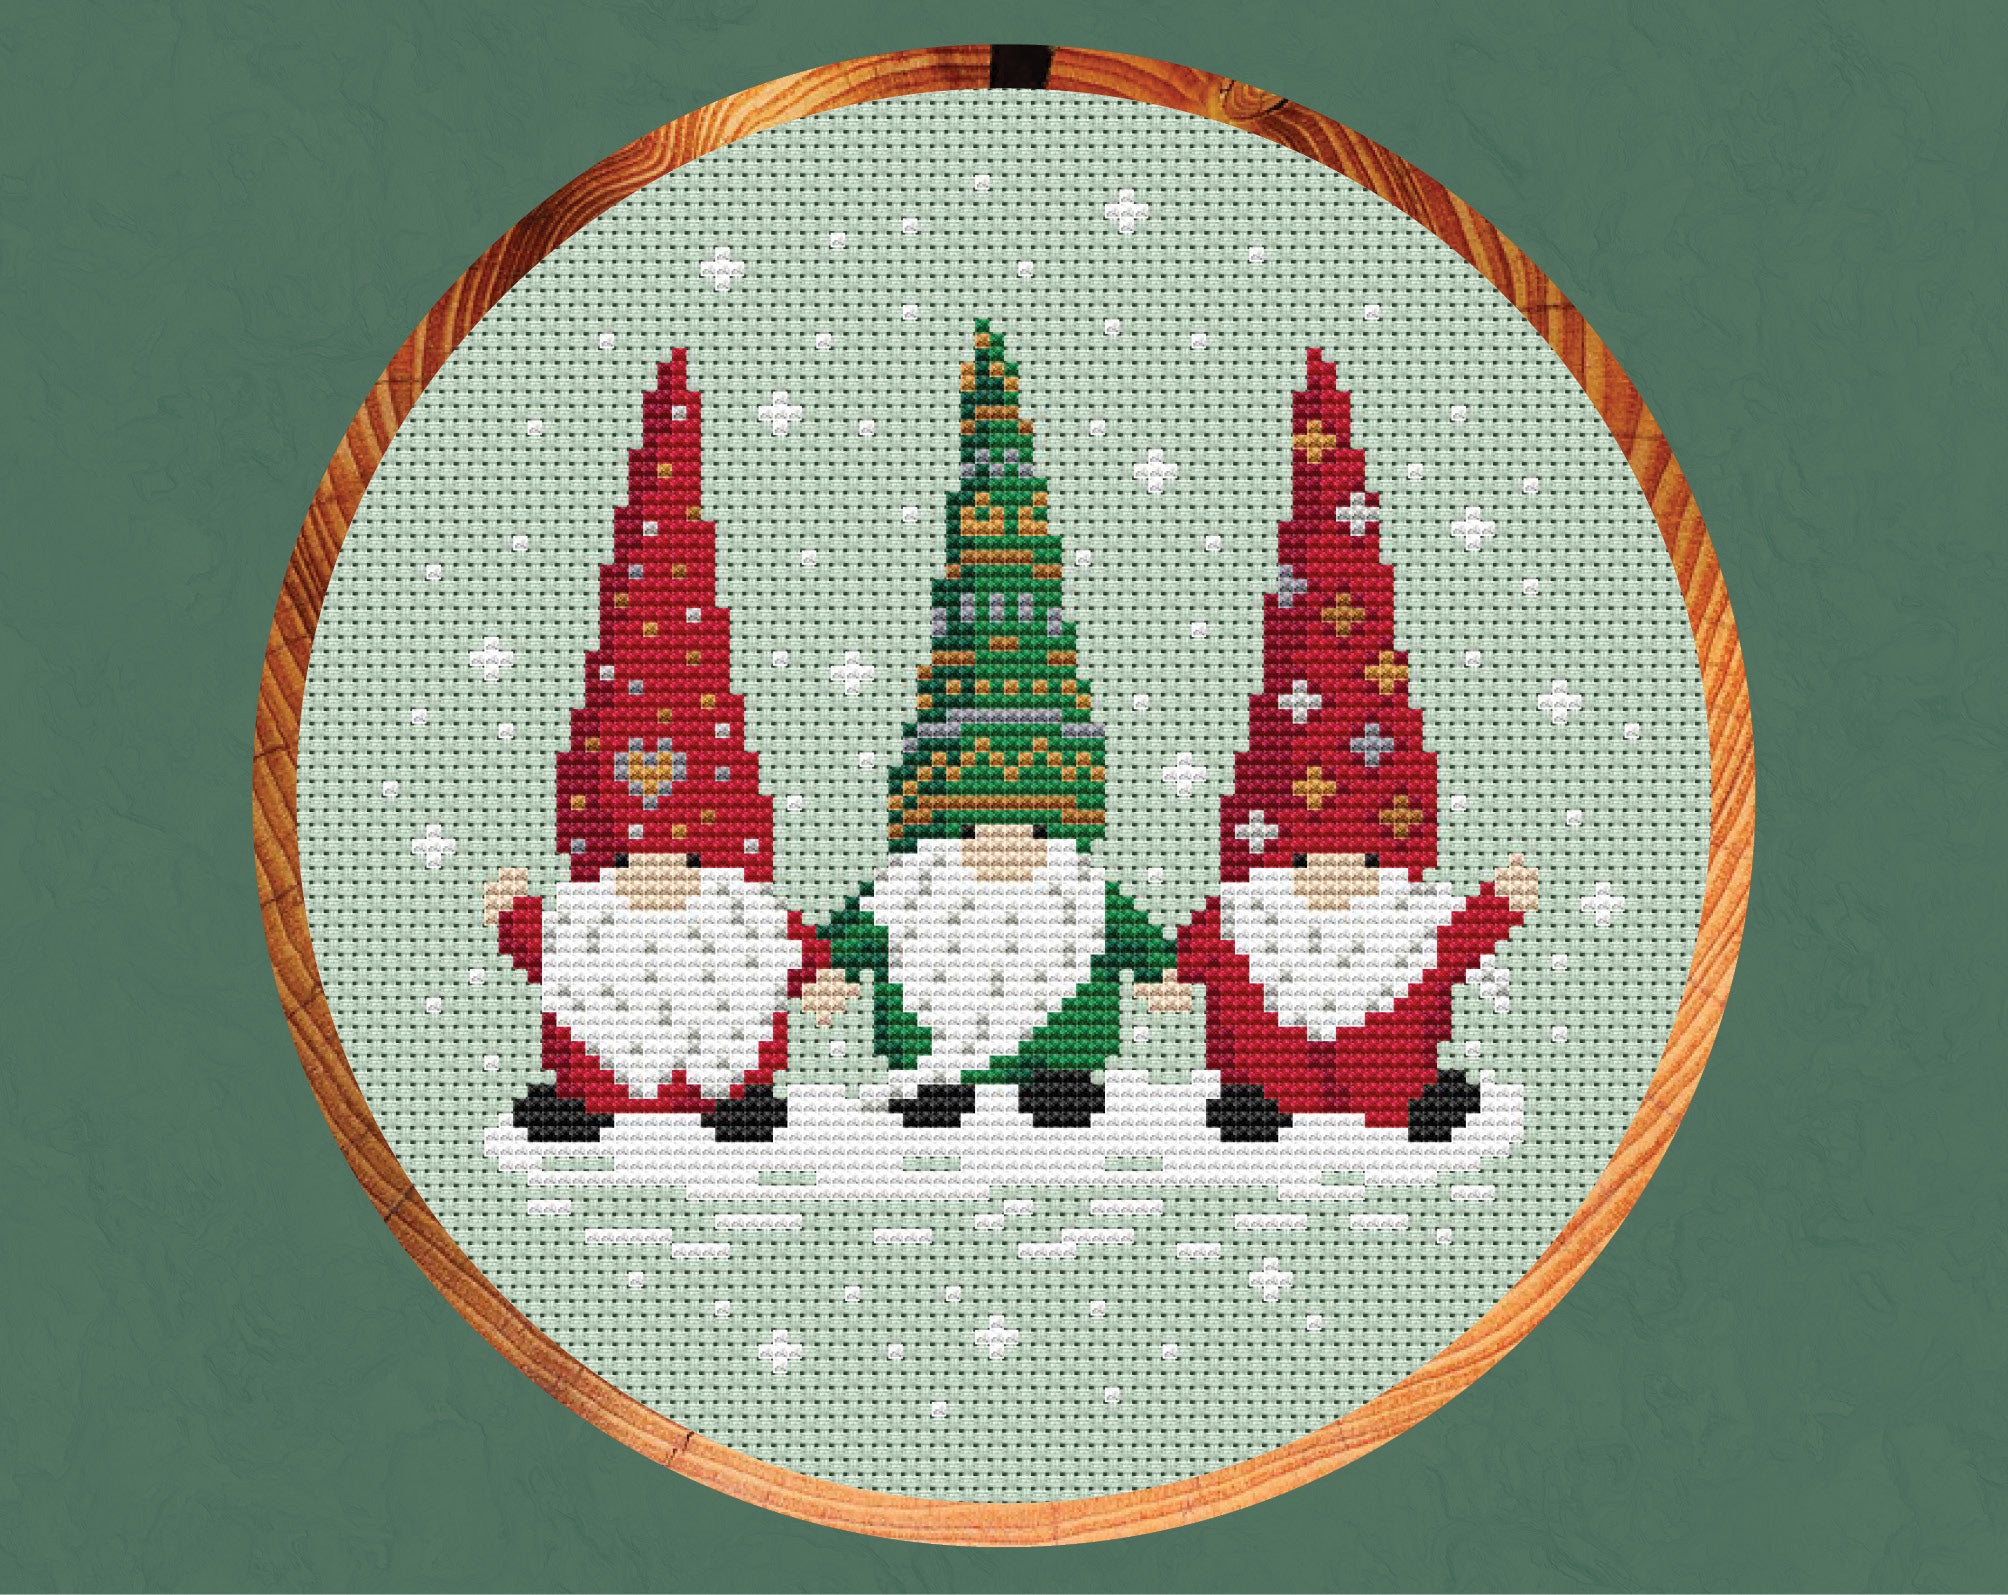 Christmas Gnome Trio cross stitch pattern - three Christmas gonks or nisse holding hands, two in red outfits and one in a green outfit, with a snowy background. Shown in a hoop.